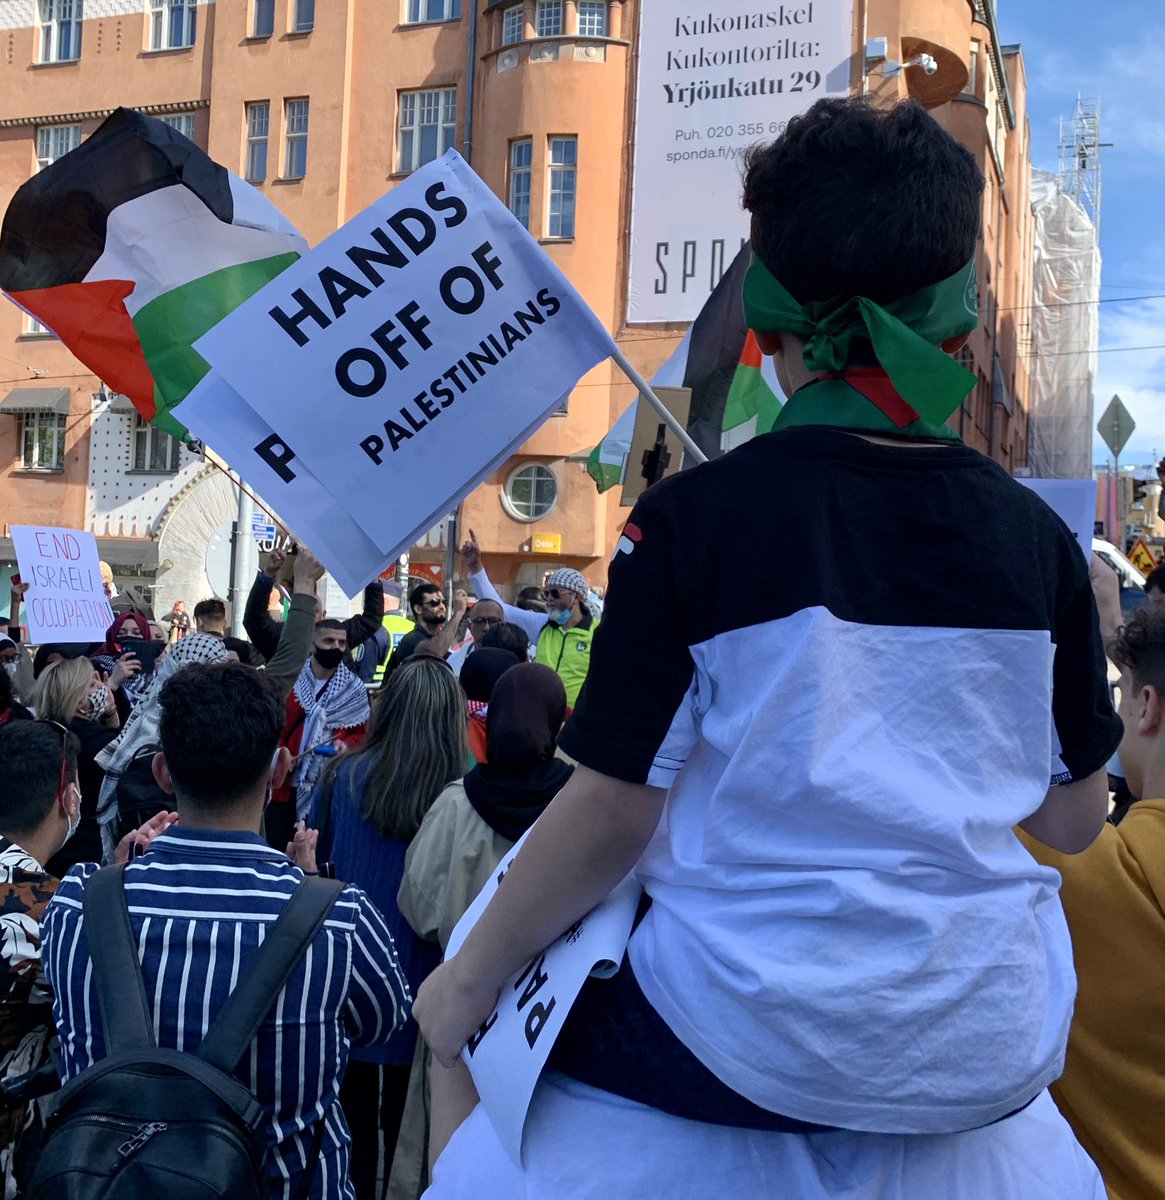 Helsinki today against Israeli colonisation, ethnic cleansing and apartheid in occupied palestine. 
#palestine #FreePalestine #GazaUnderAttack #israel #Apartheid #colonialism https://t.co/99CqzXk6Hn